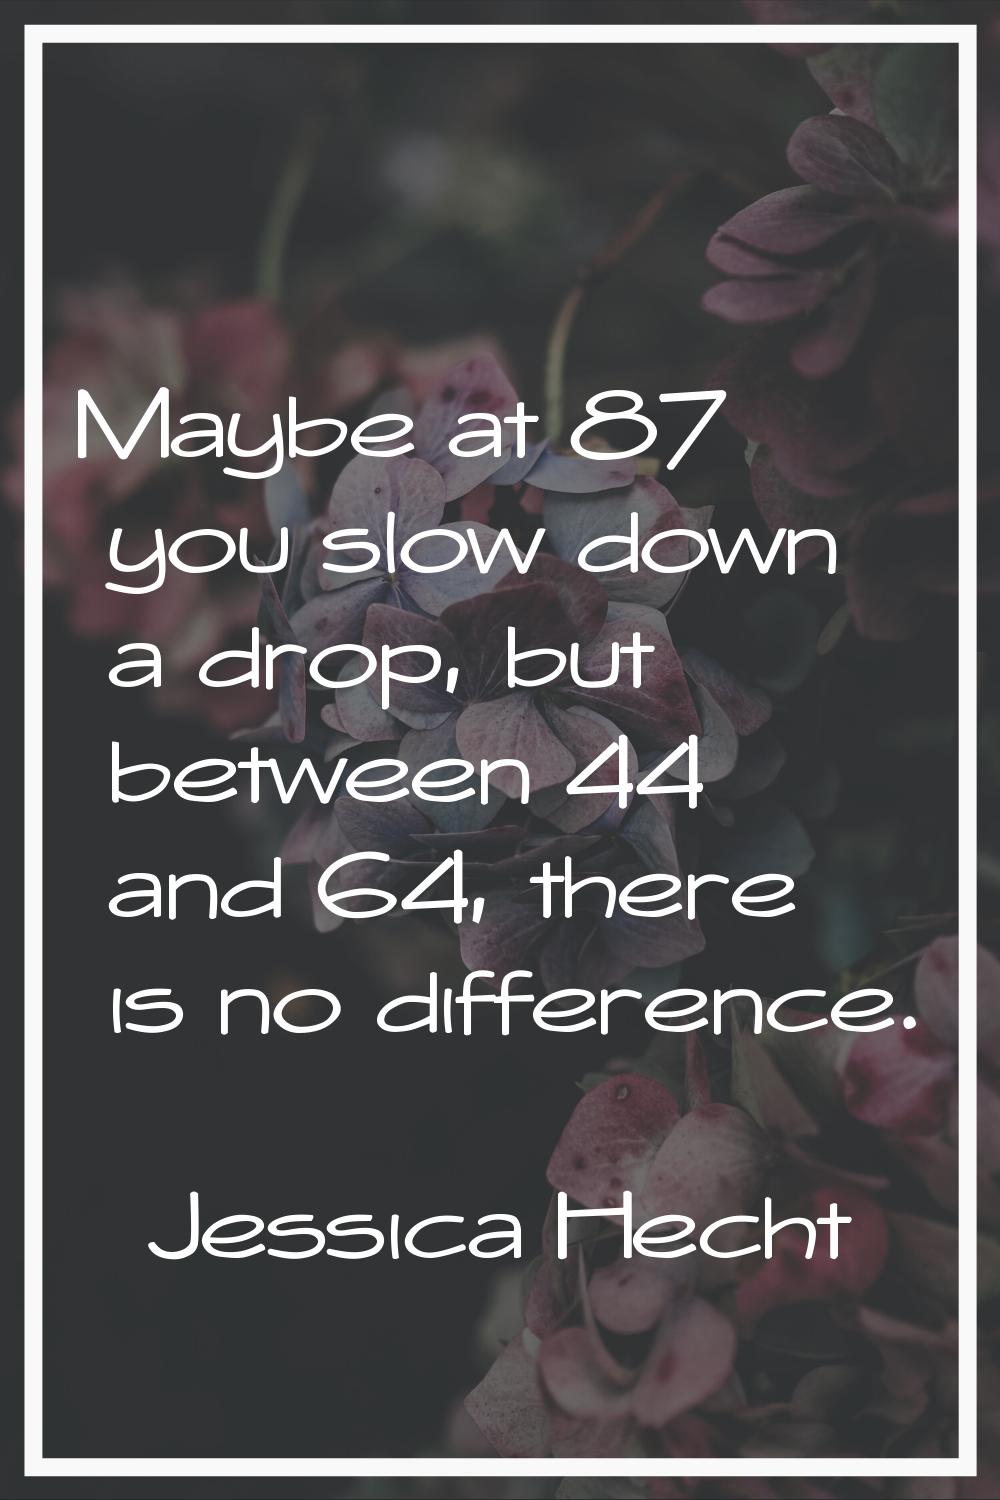 Maybe at 87 you slow down a drop, but between 44 and 64, there is no difference.